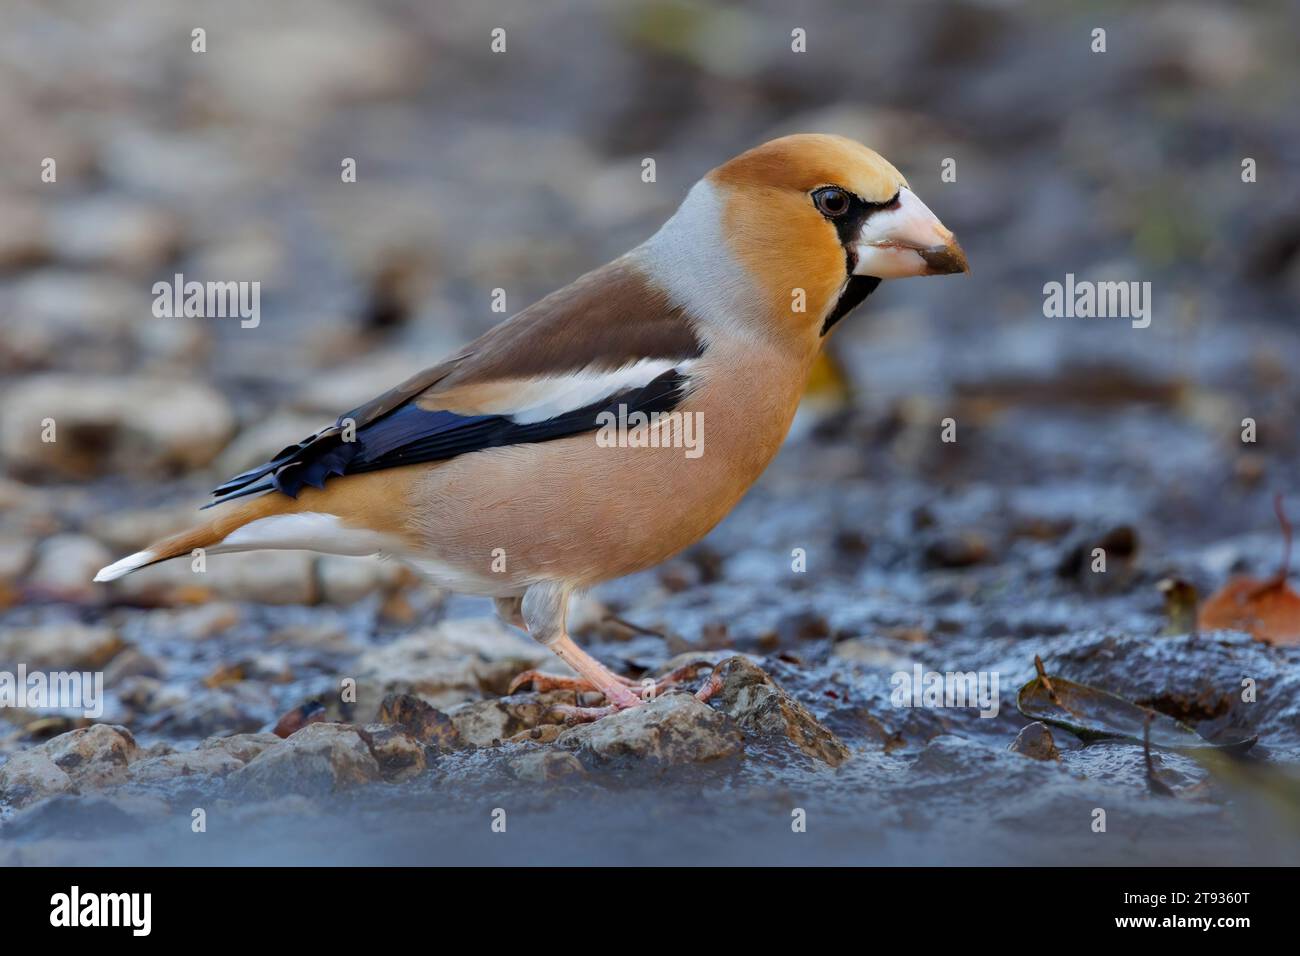 Hawfinch (Coccothraustes coccothraustes), side view of an adult male standing on the ground, Campania, Italy Stock Photo